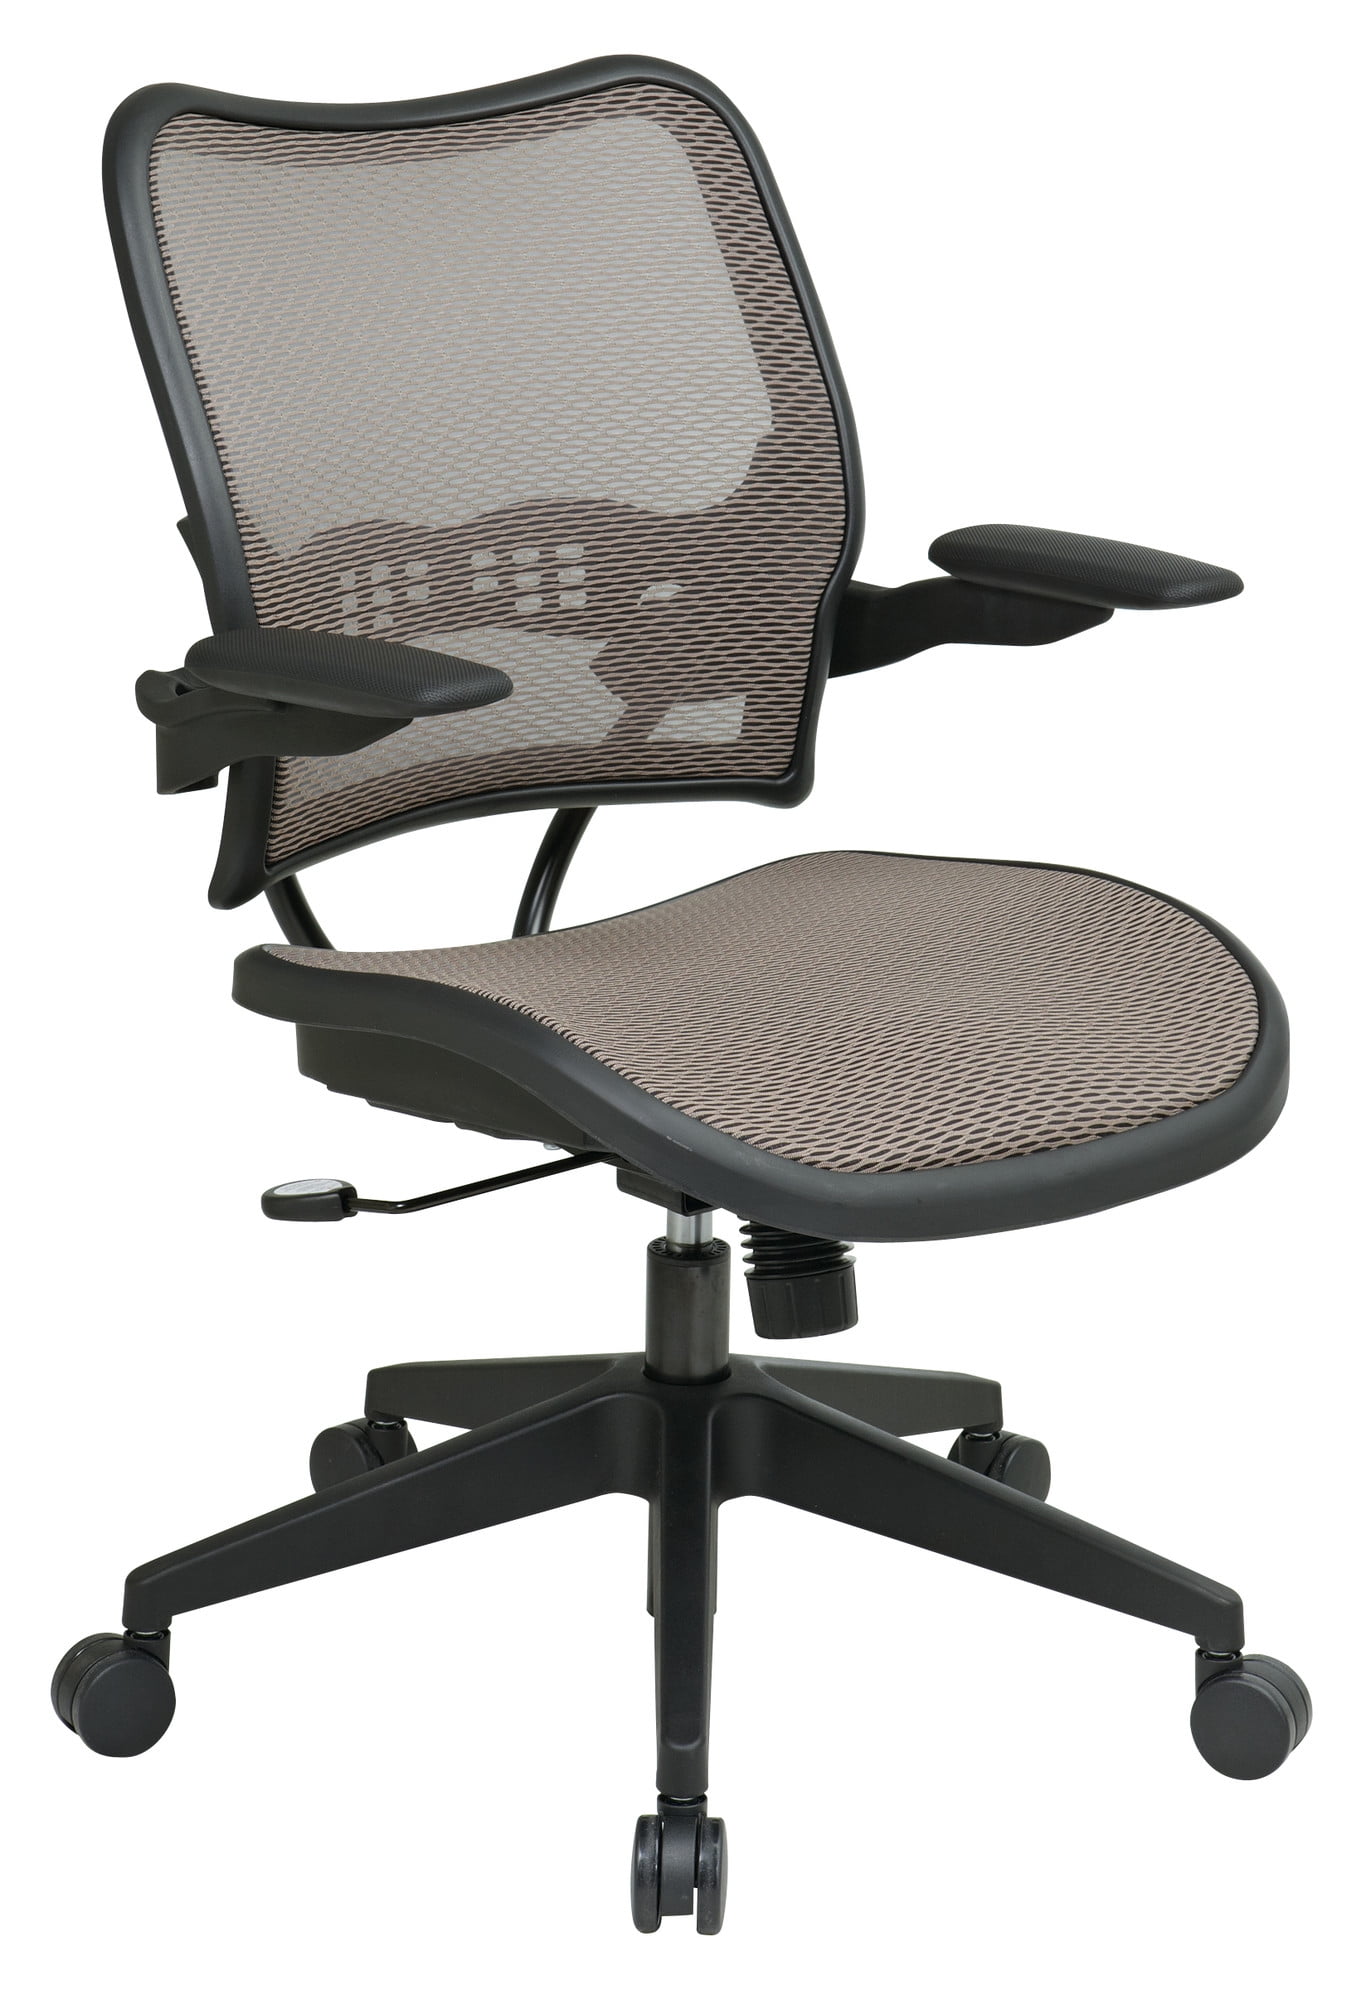 55-38N17 Mesh Desk Chair Brown Office Star Desk Chair 19 in to 23 in Nominal Seat Height Range